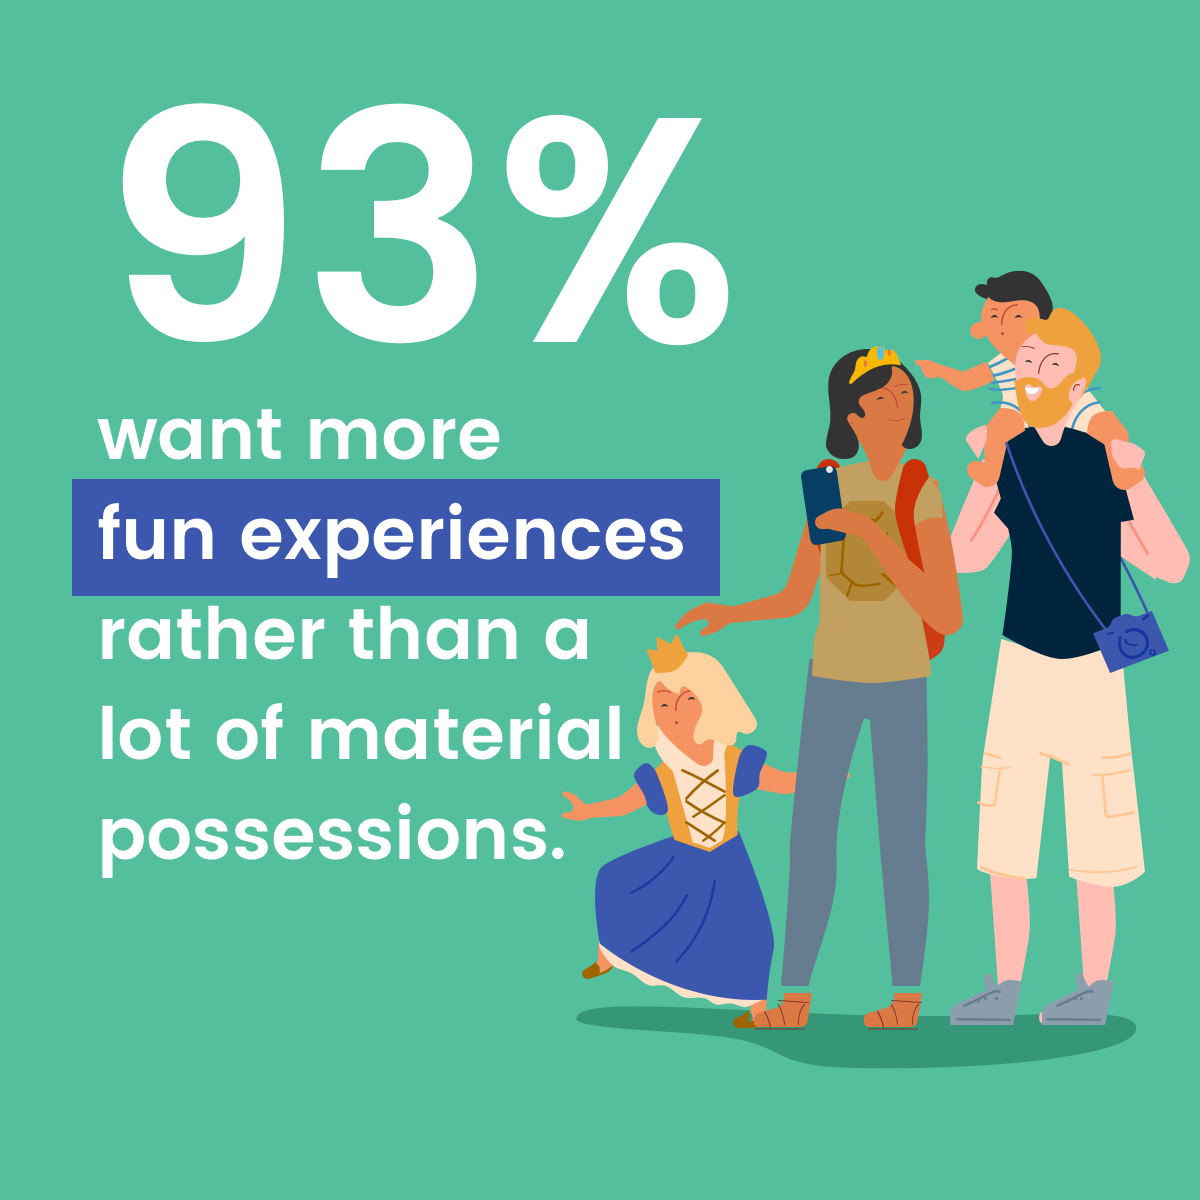 97% want more fun experiences rather than a lot of material possessions.